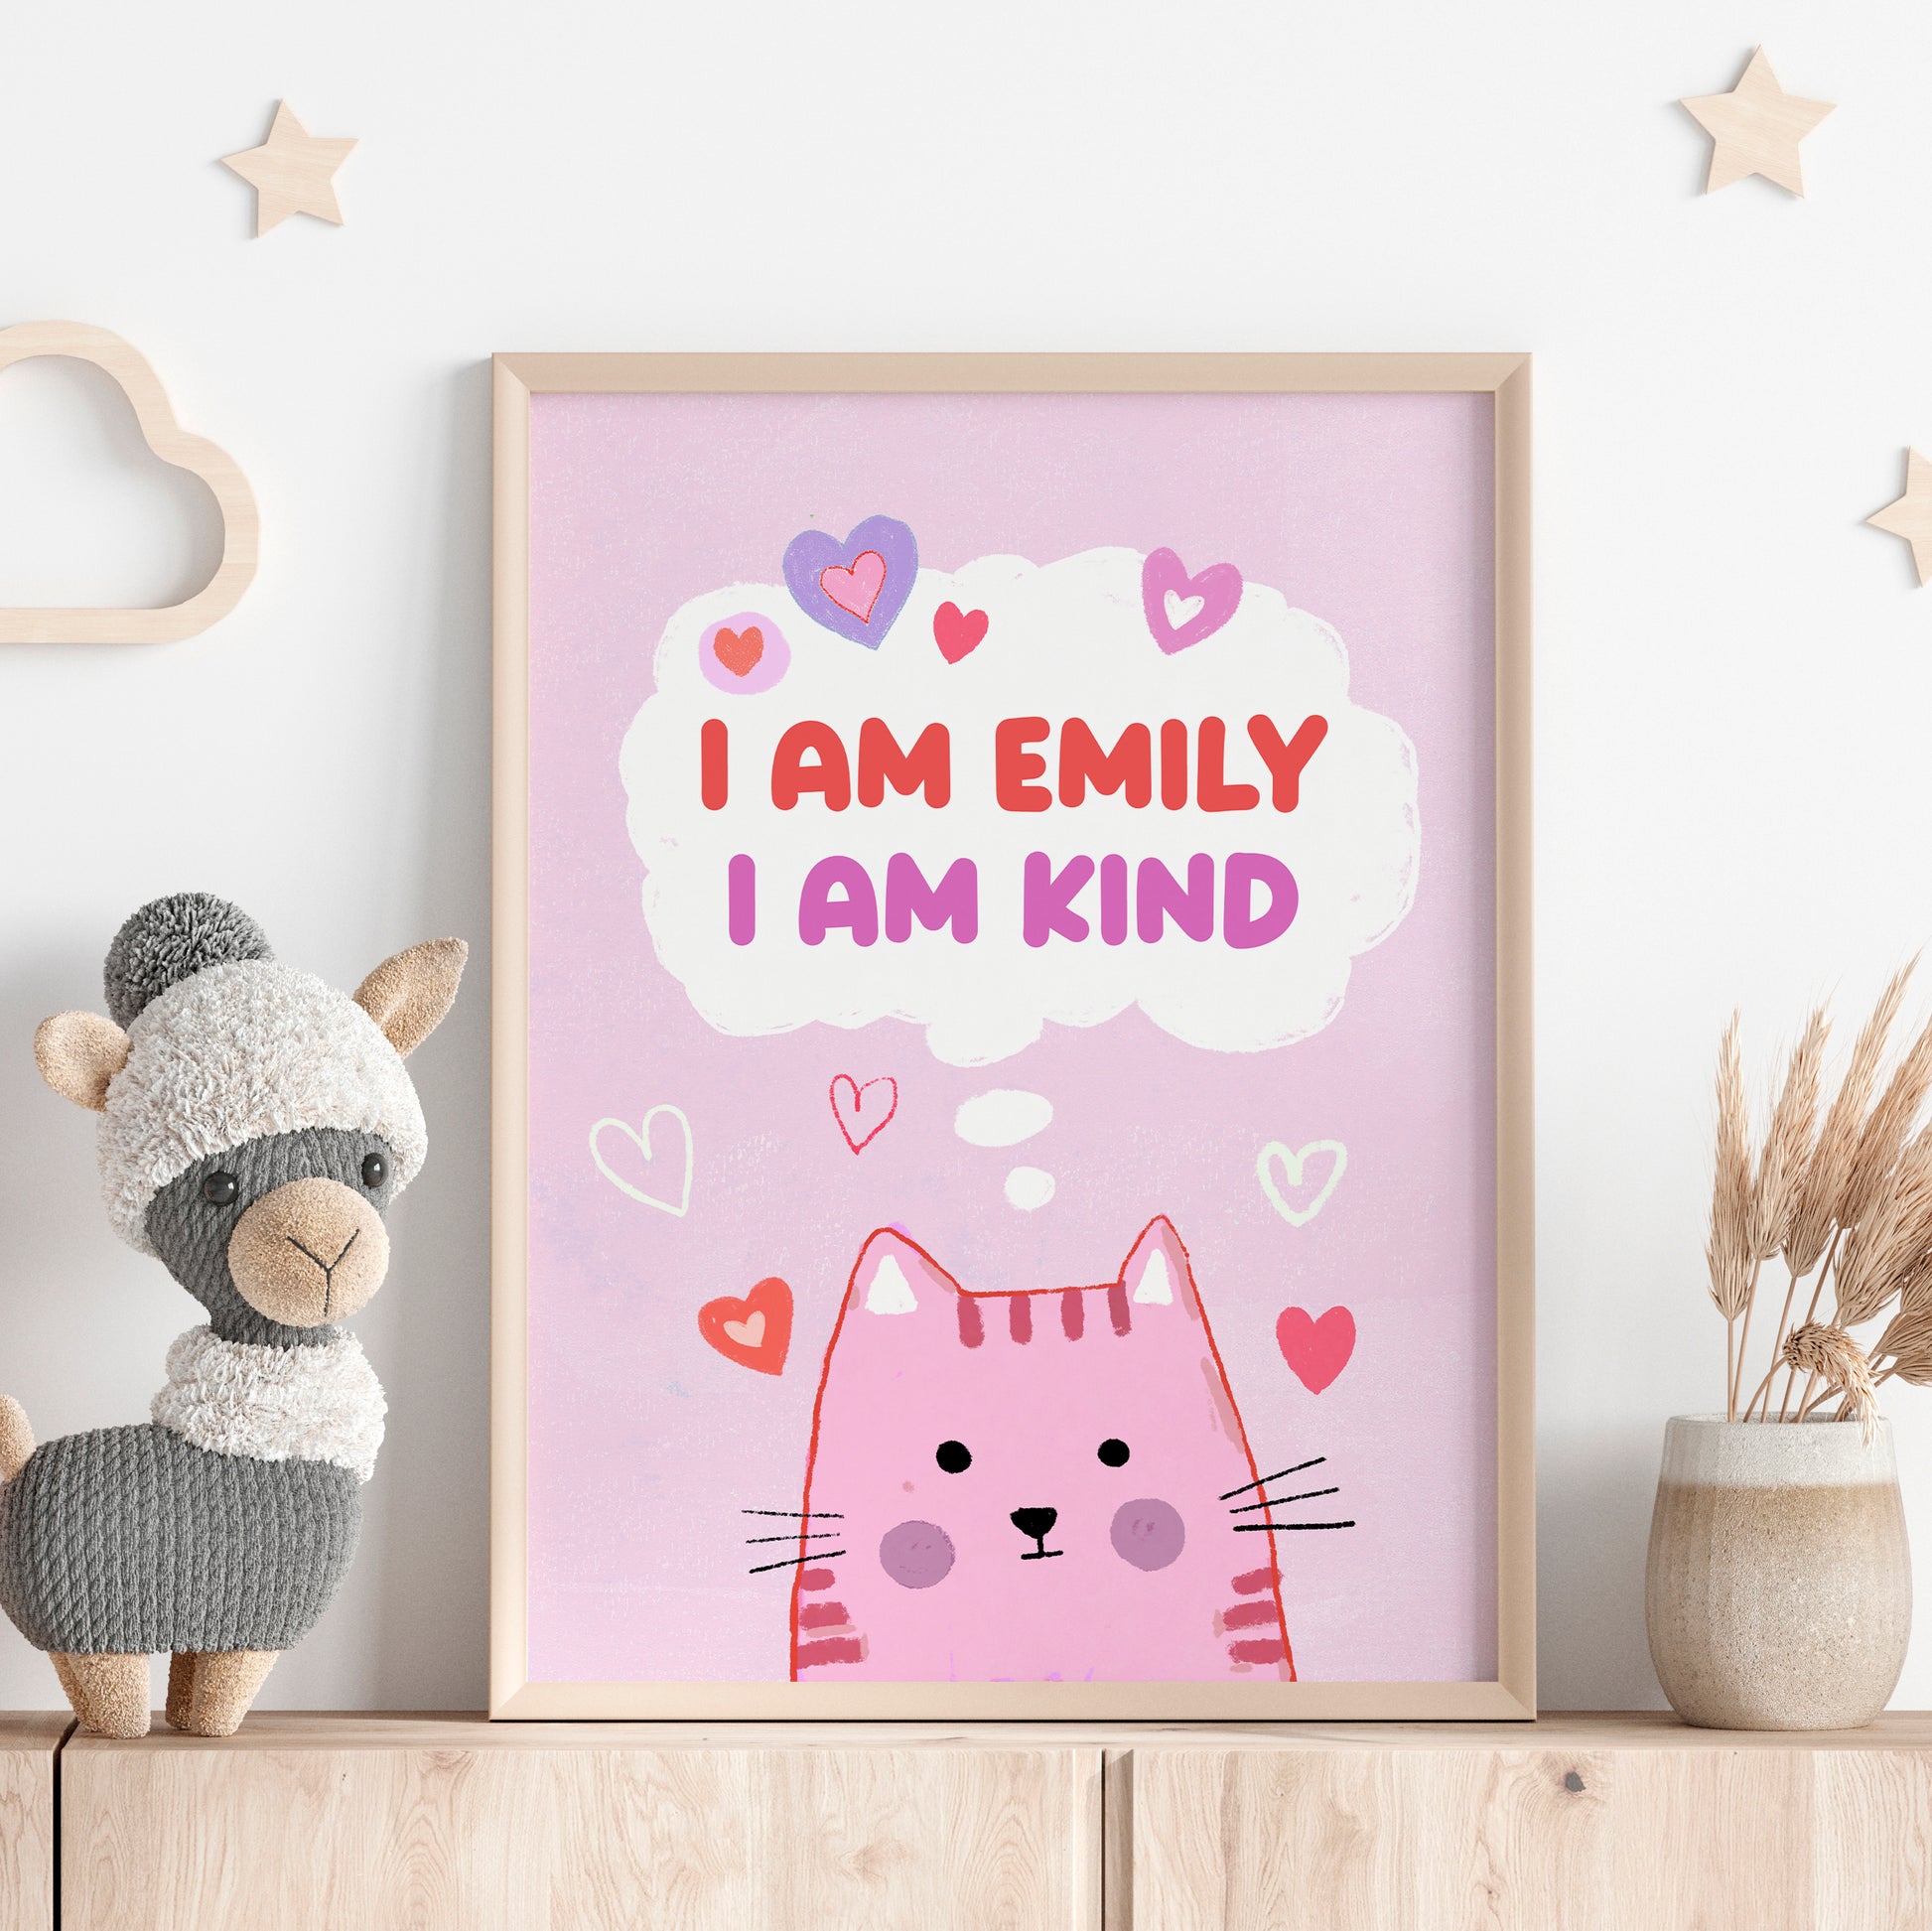 Cute cat Affirmation Framed Poster - Customizable